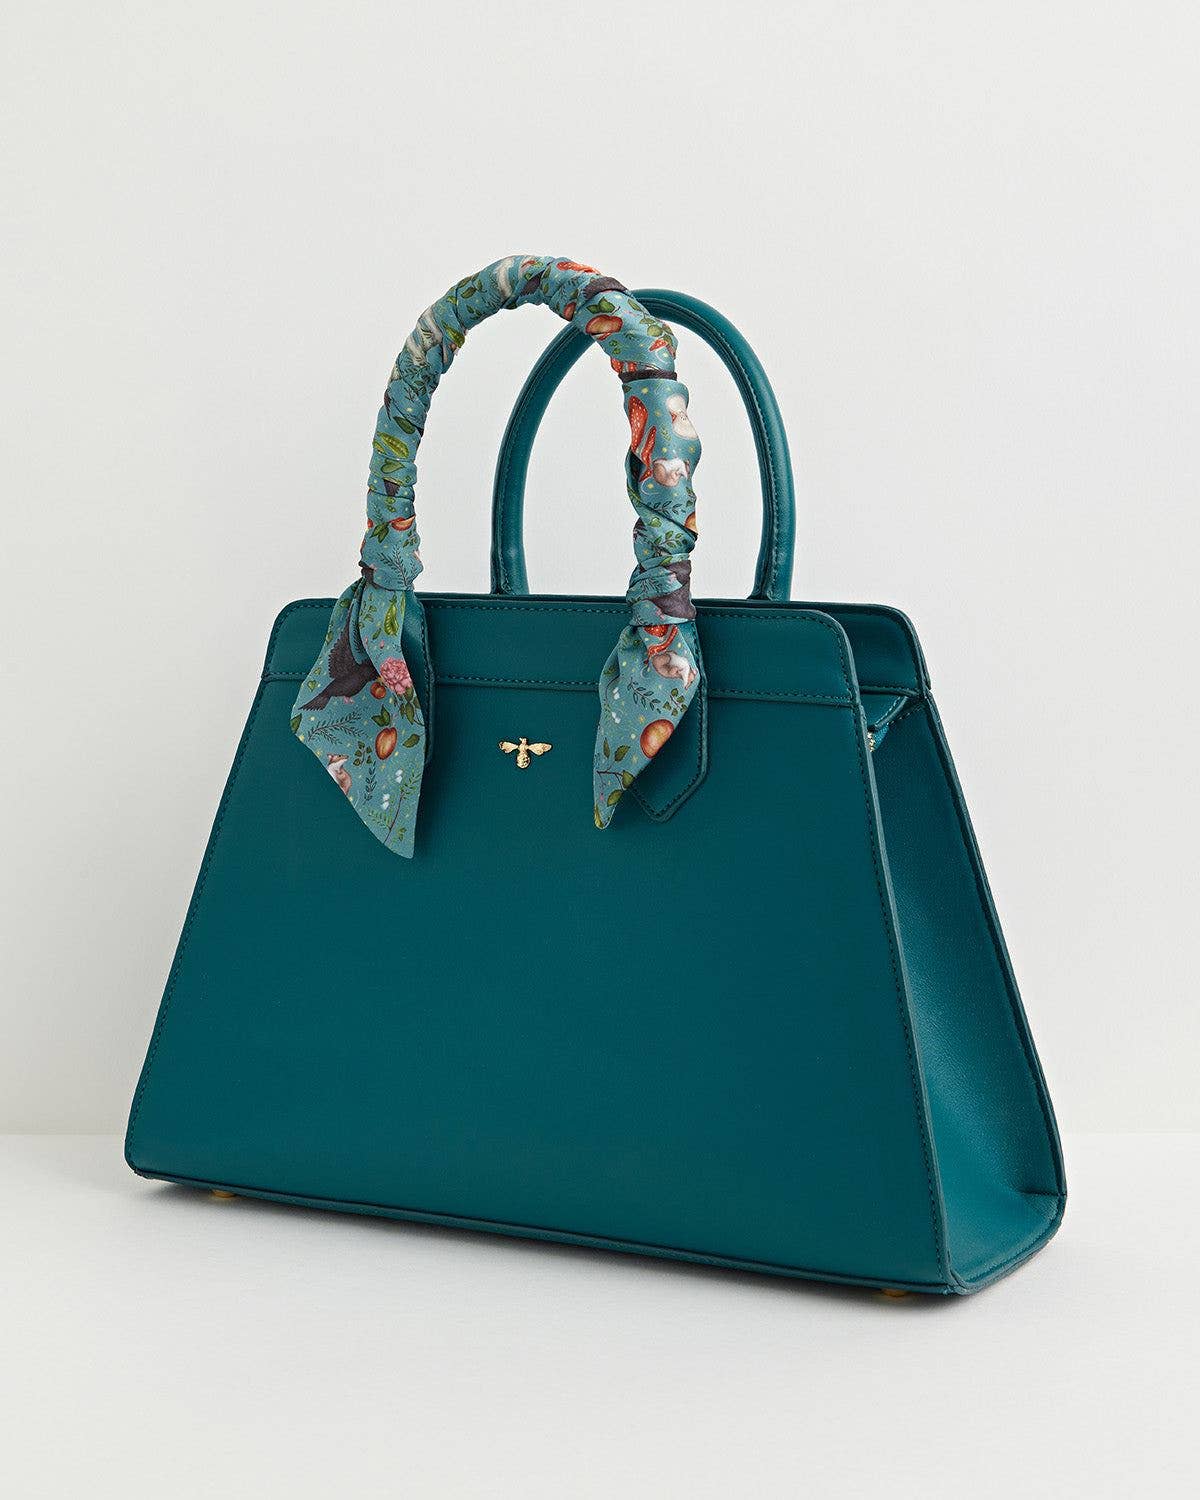 Into the Woods Teal Tote